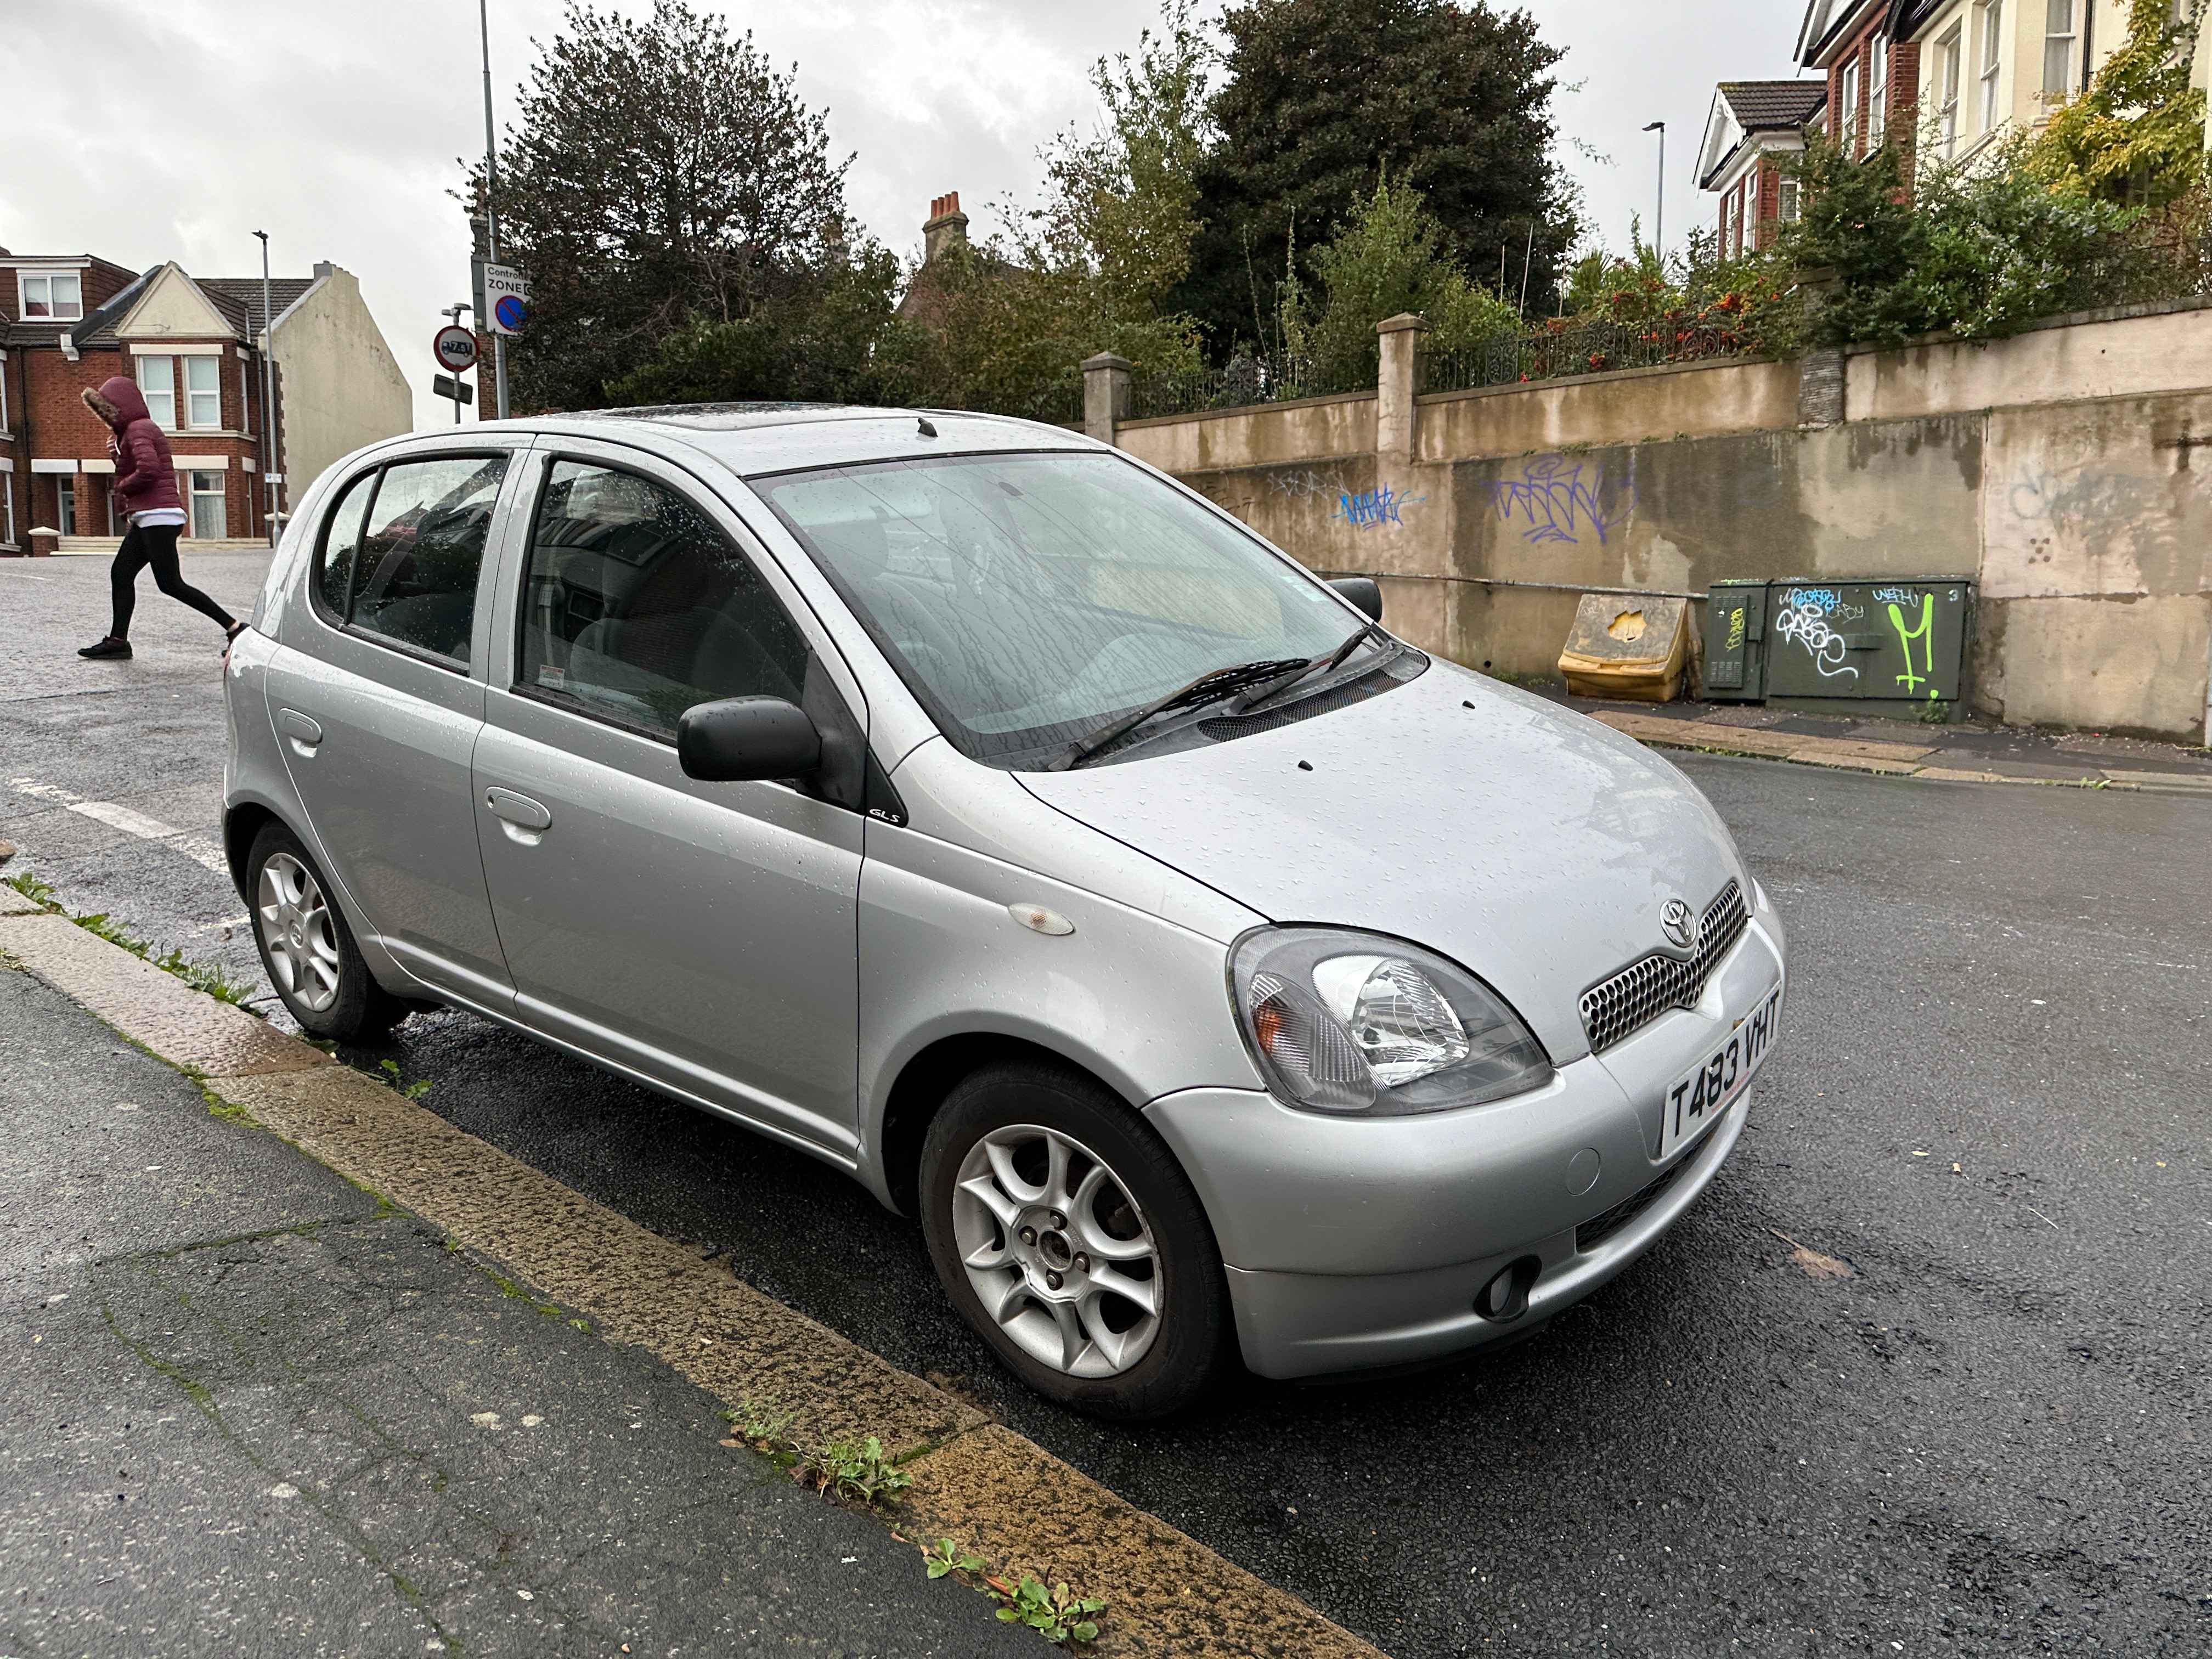 Photograph of T483 VHT - a Silver Toyota Yaris parked in Hollingdean by a non-resident. The seventh of fourteen photographs supplied by the residents of Hollingdean.